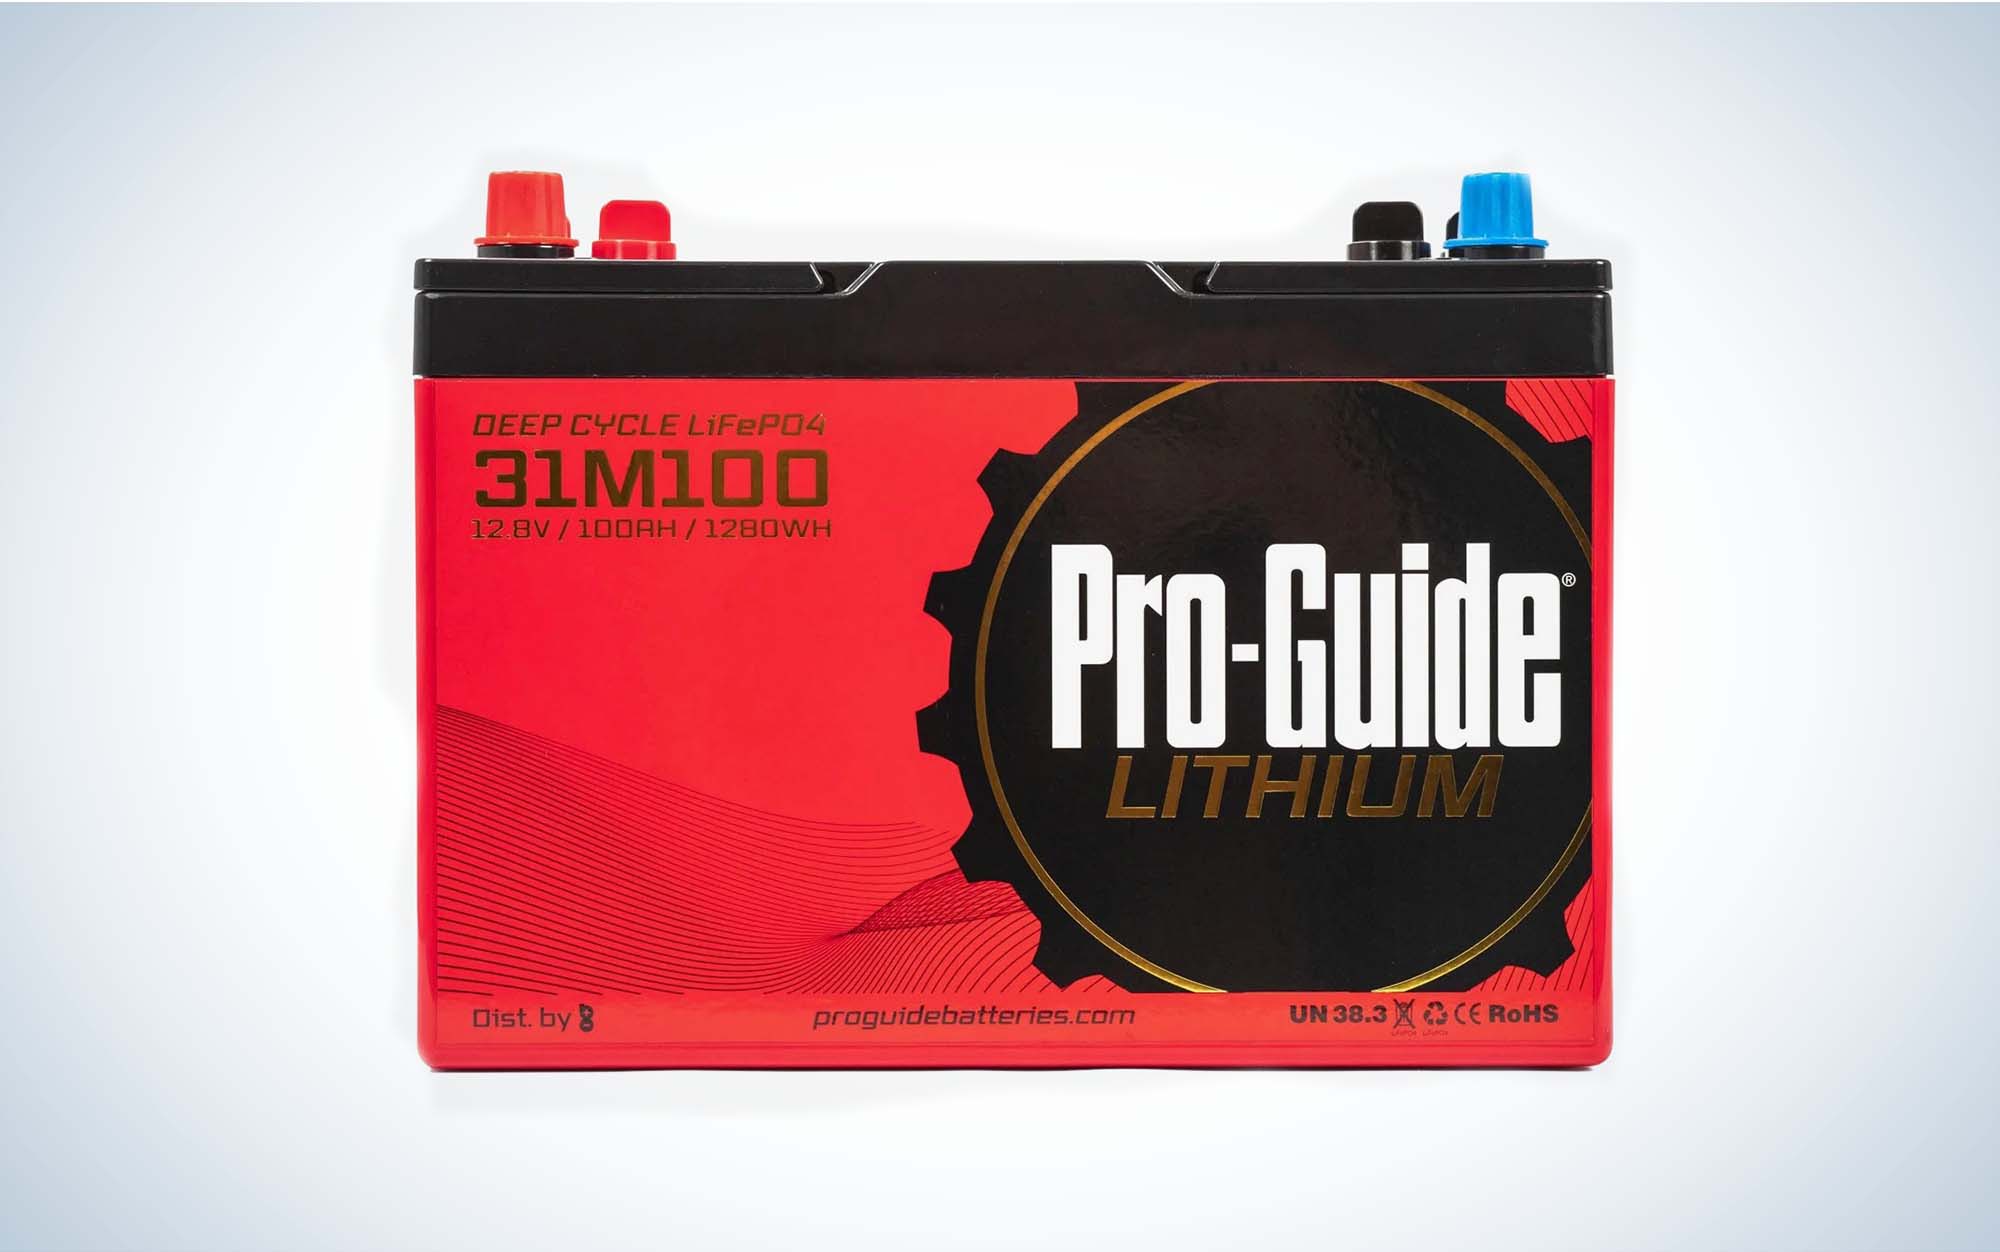 The lithium pro guide is the best trolling motor battery